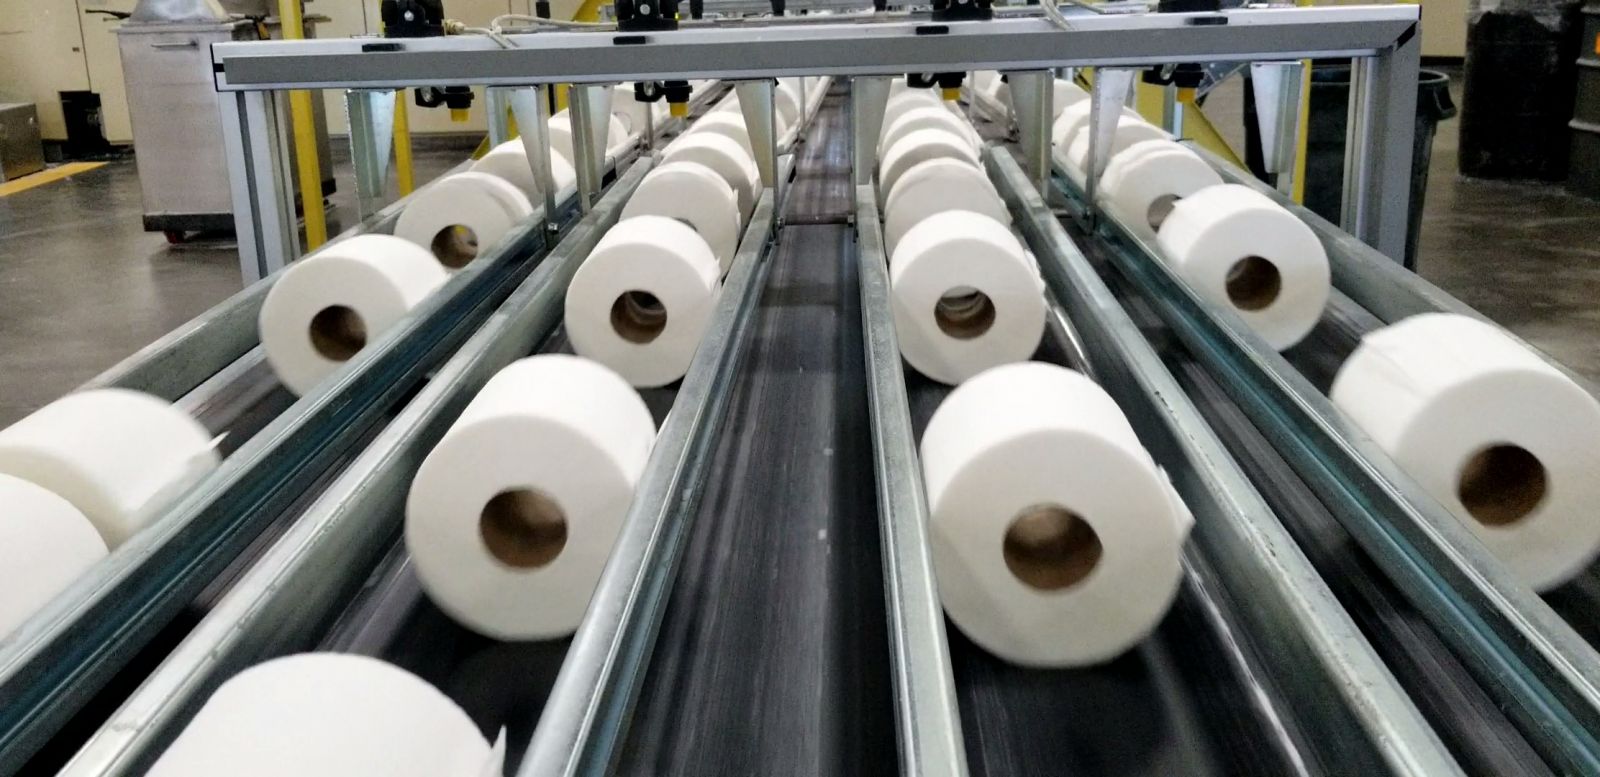 Sun Paper cranks out 500 toilet paper rolls in a minute and over 5 million in a week. (Photo/Provided)